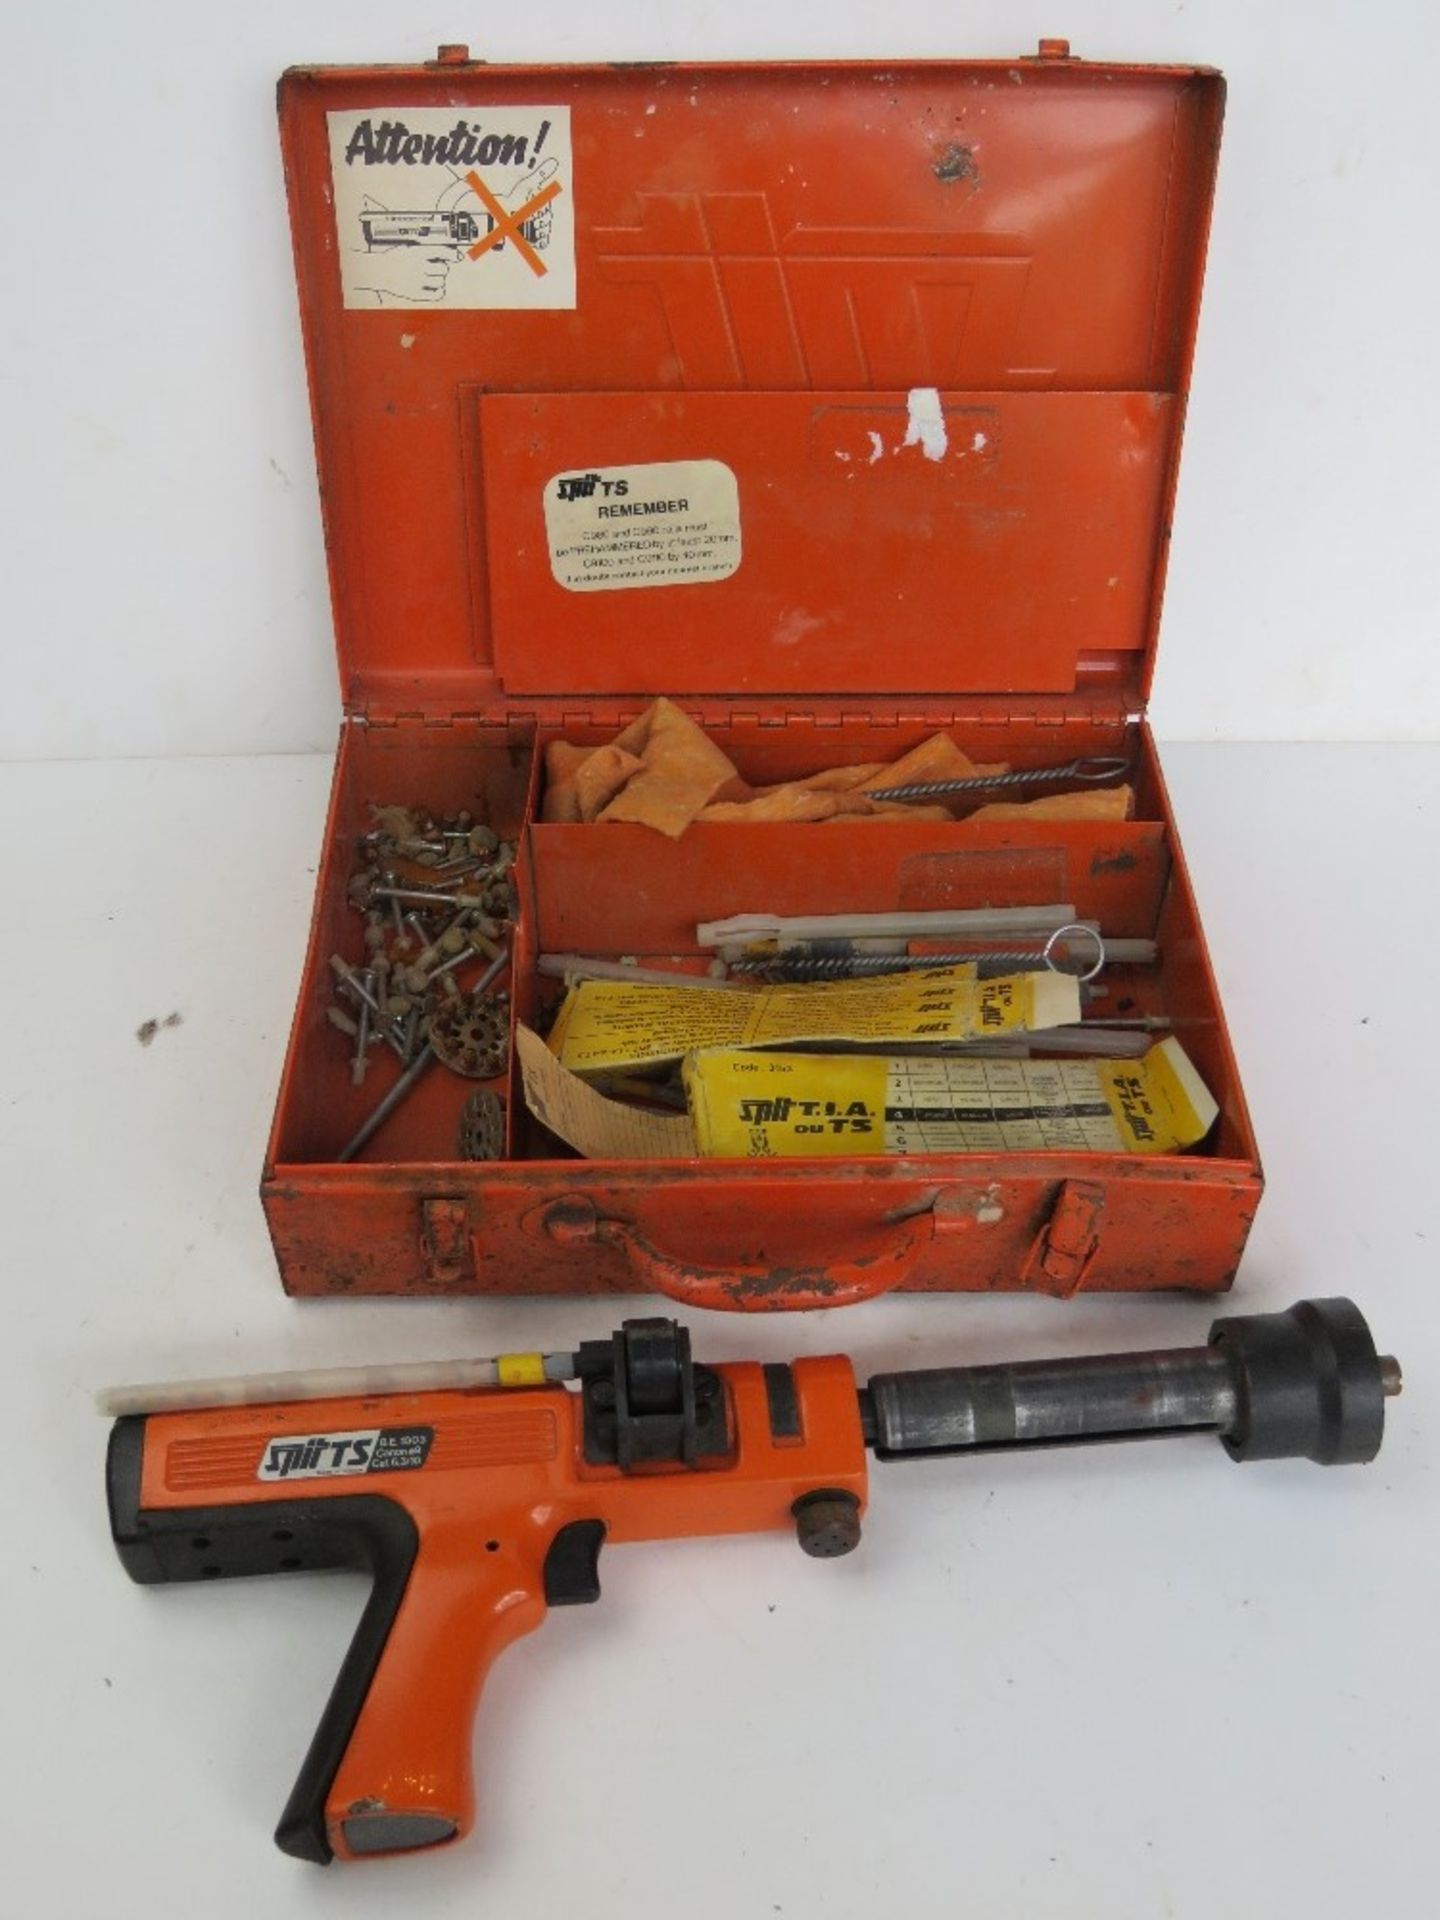 A Spit TS BE0145 powerful cartridge nail gun in box with accessories.